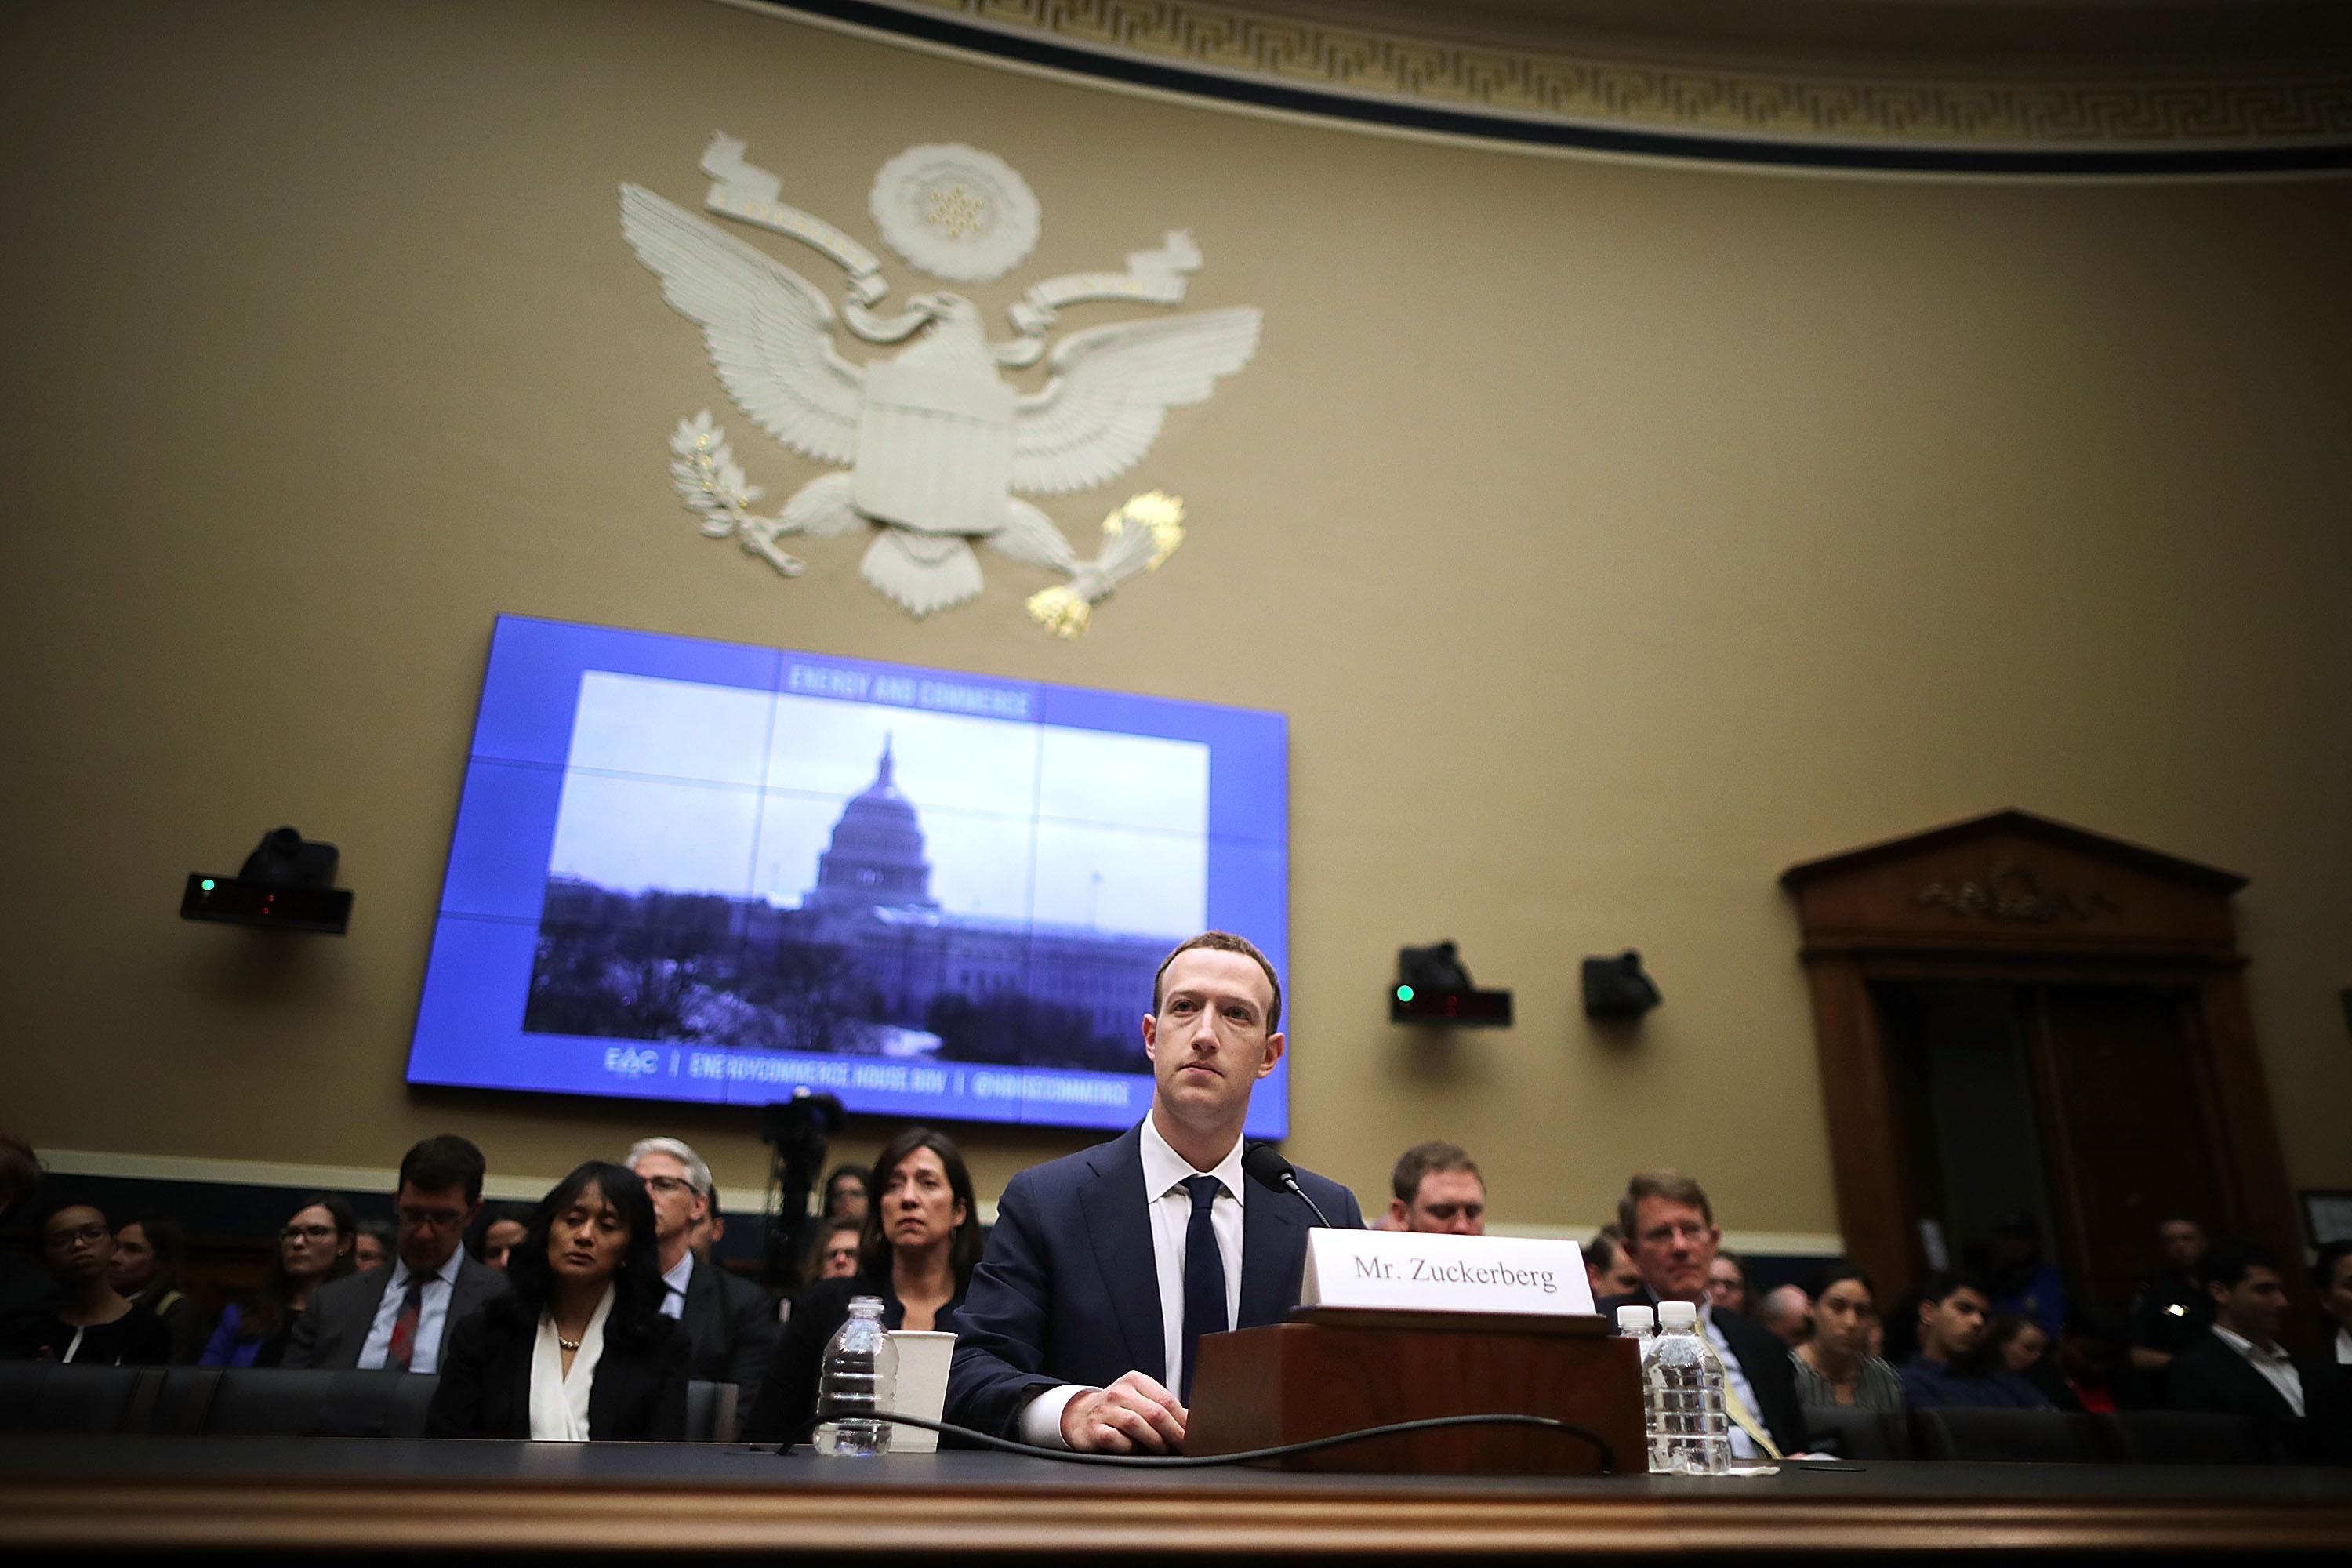 Zuckerberg sits at a table in a large room. Behind him are an audience of watchers, a screen showing an image of the Capital Building, and the Great Seal of the U.S.